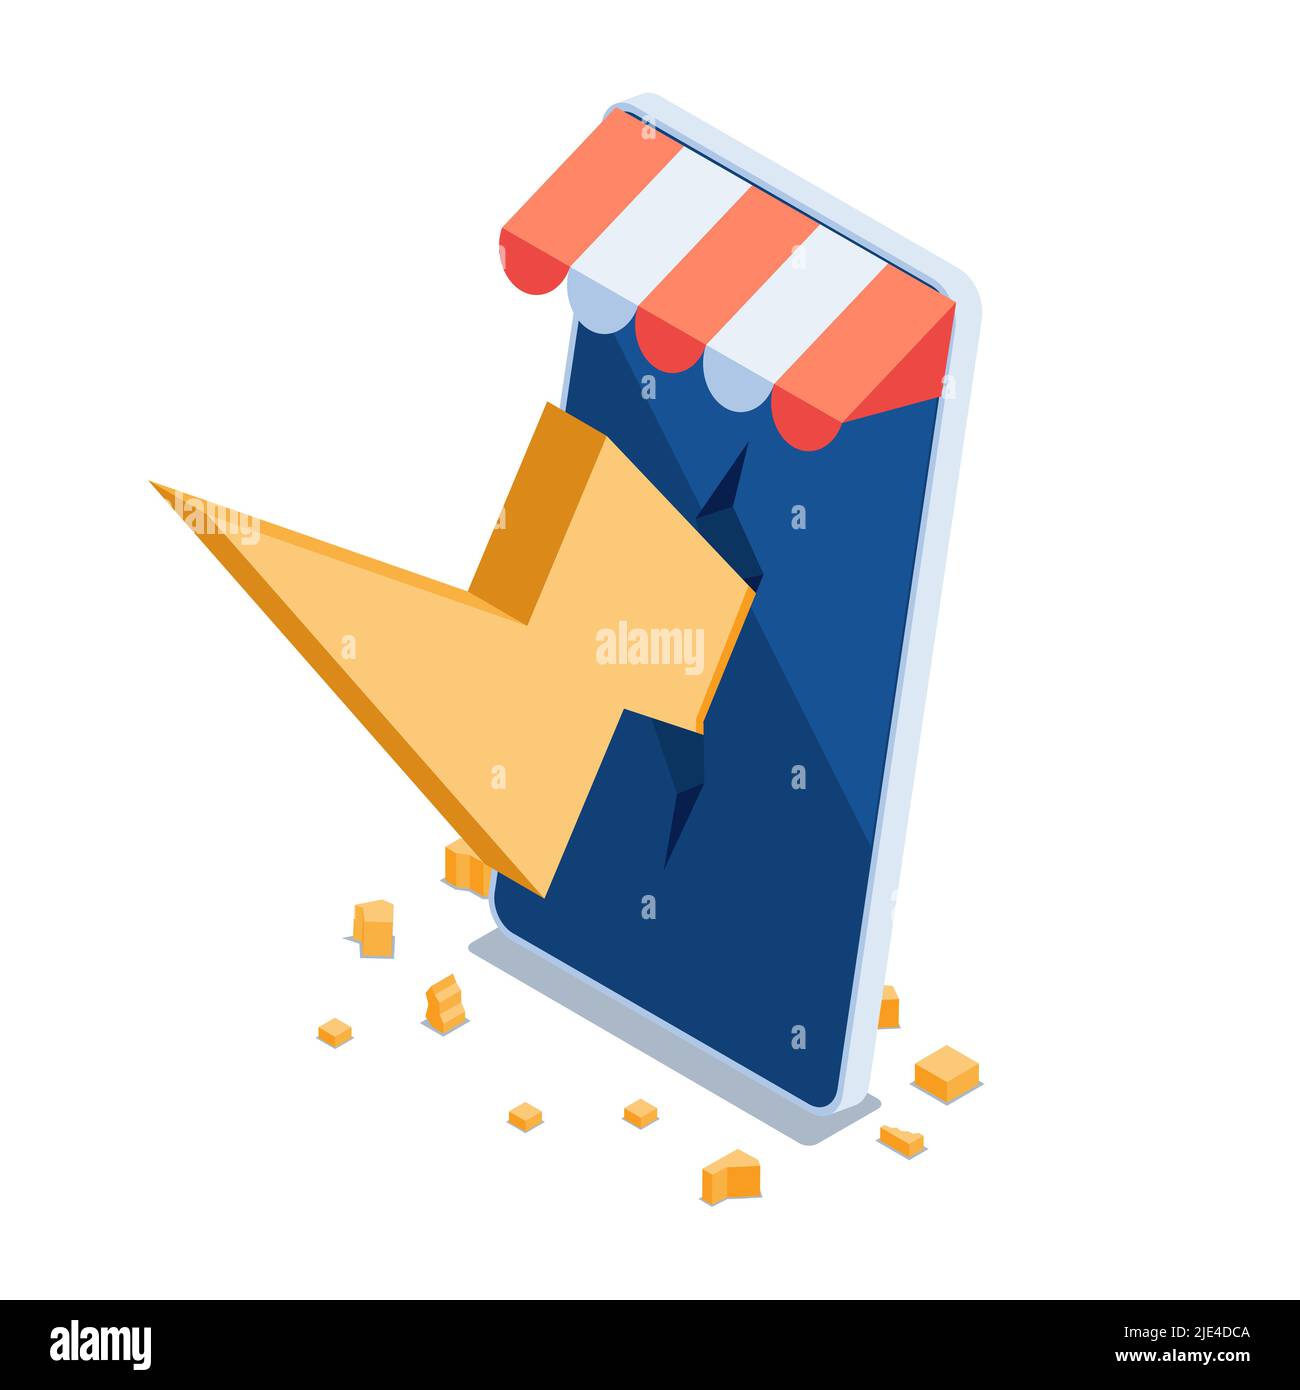 Flat 3d Isometric Golden Lightning Bolt on Smartphone Screen. Flash Sale and Online Shopping Concept. Stock Vector